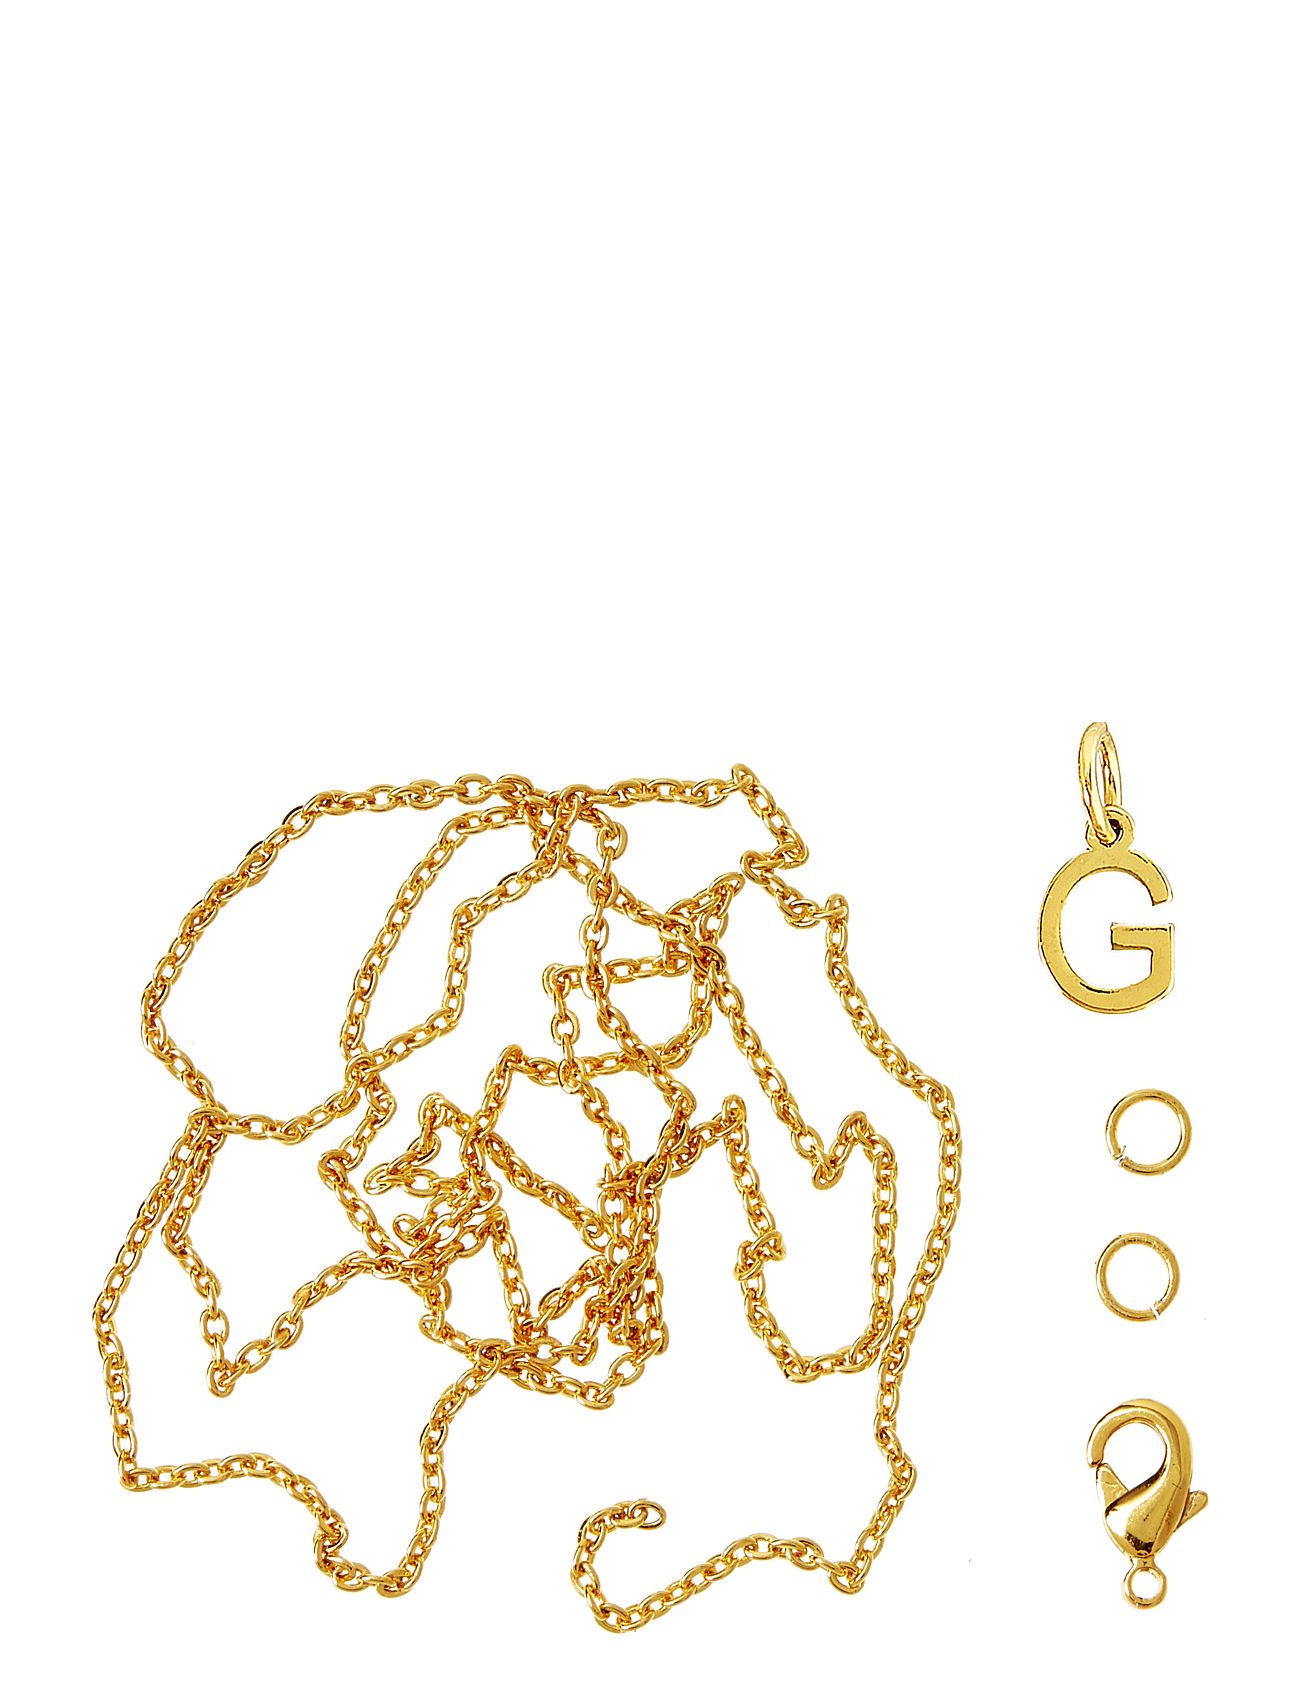 Letter G Gp With O-Ring, Chain And Clasp Toys Creativity Drawing & Crafts Craft Jewellery & Accessories Gold Me & My Box